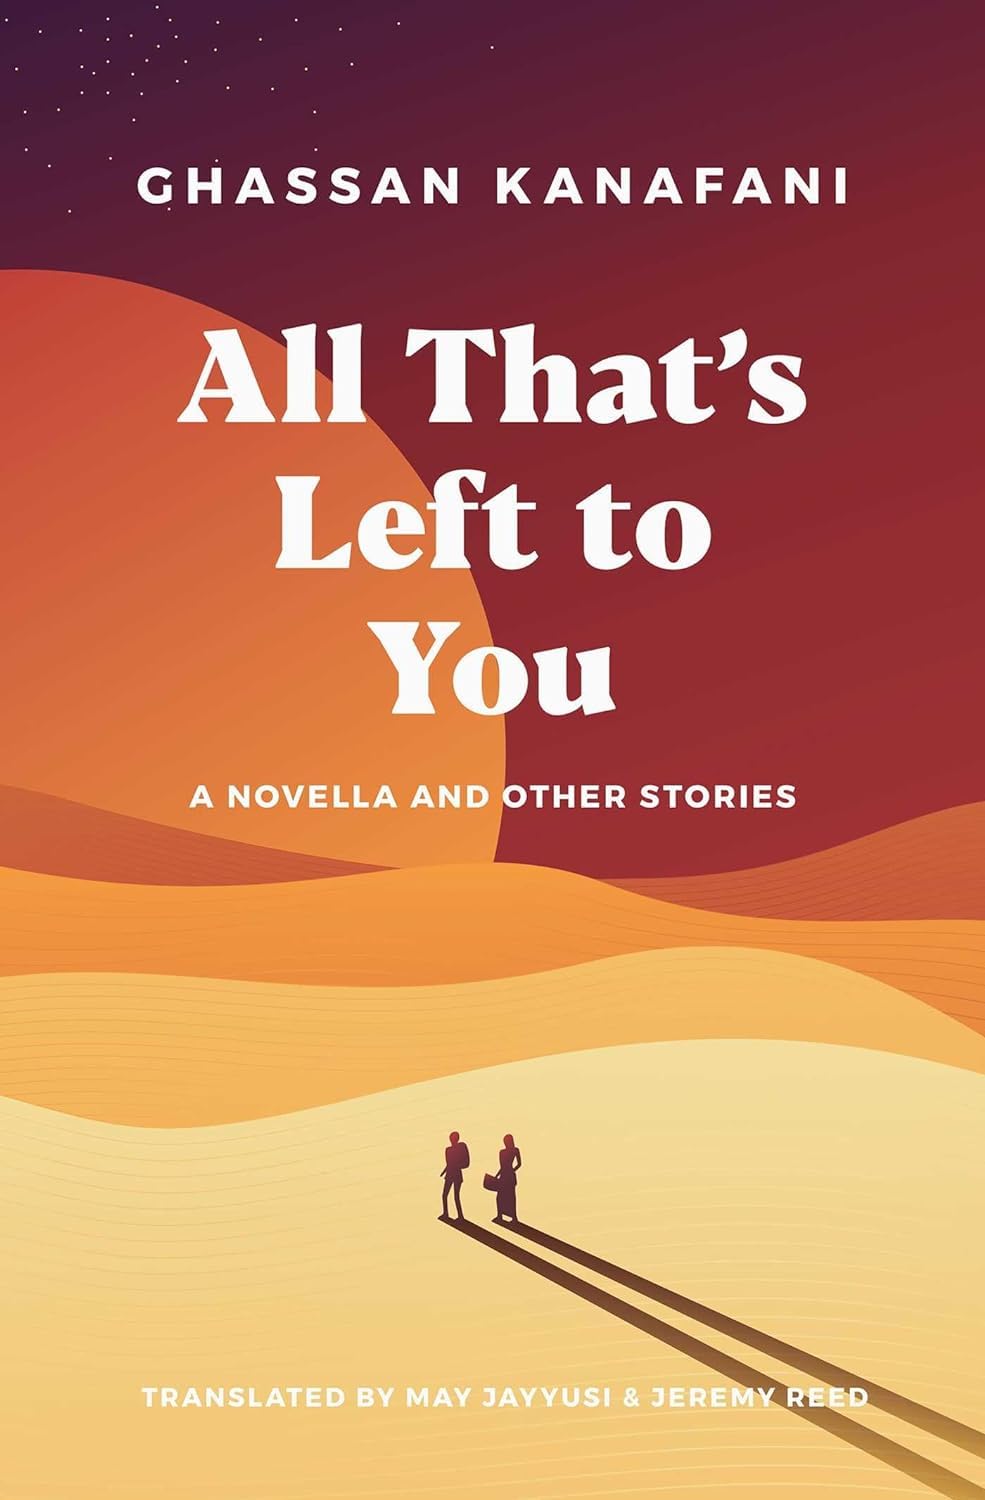 All that's Left to You: A Novella and Other Stories by Ghassan Kanafani